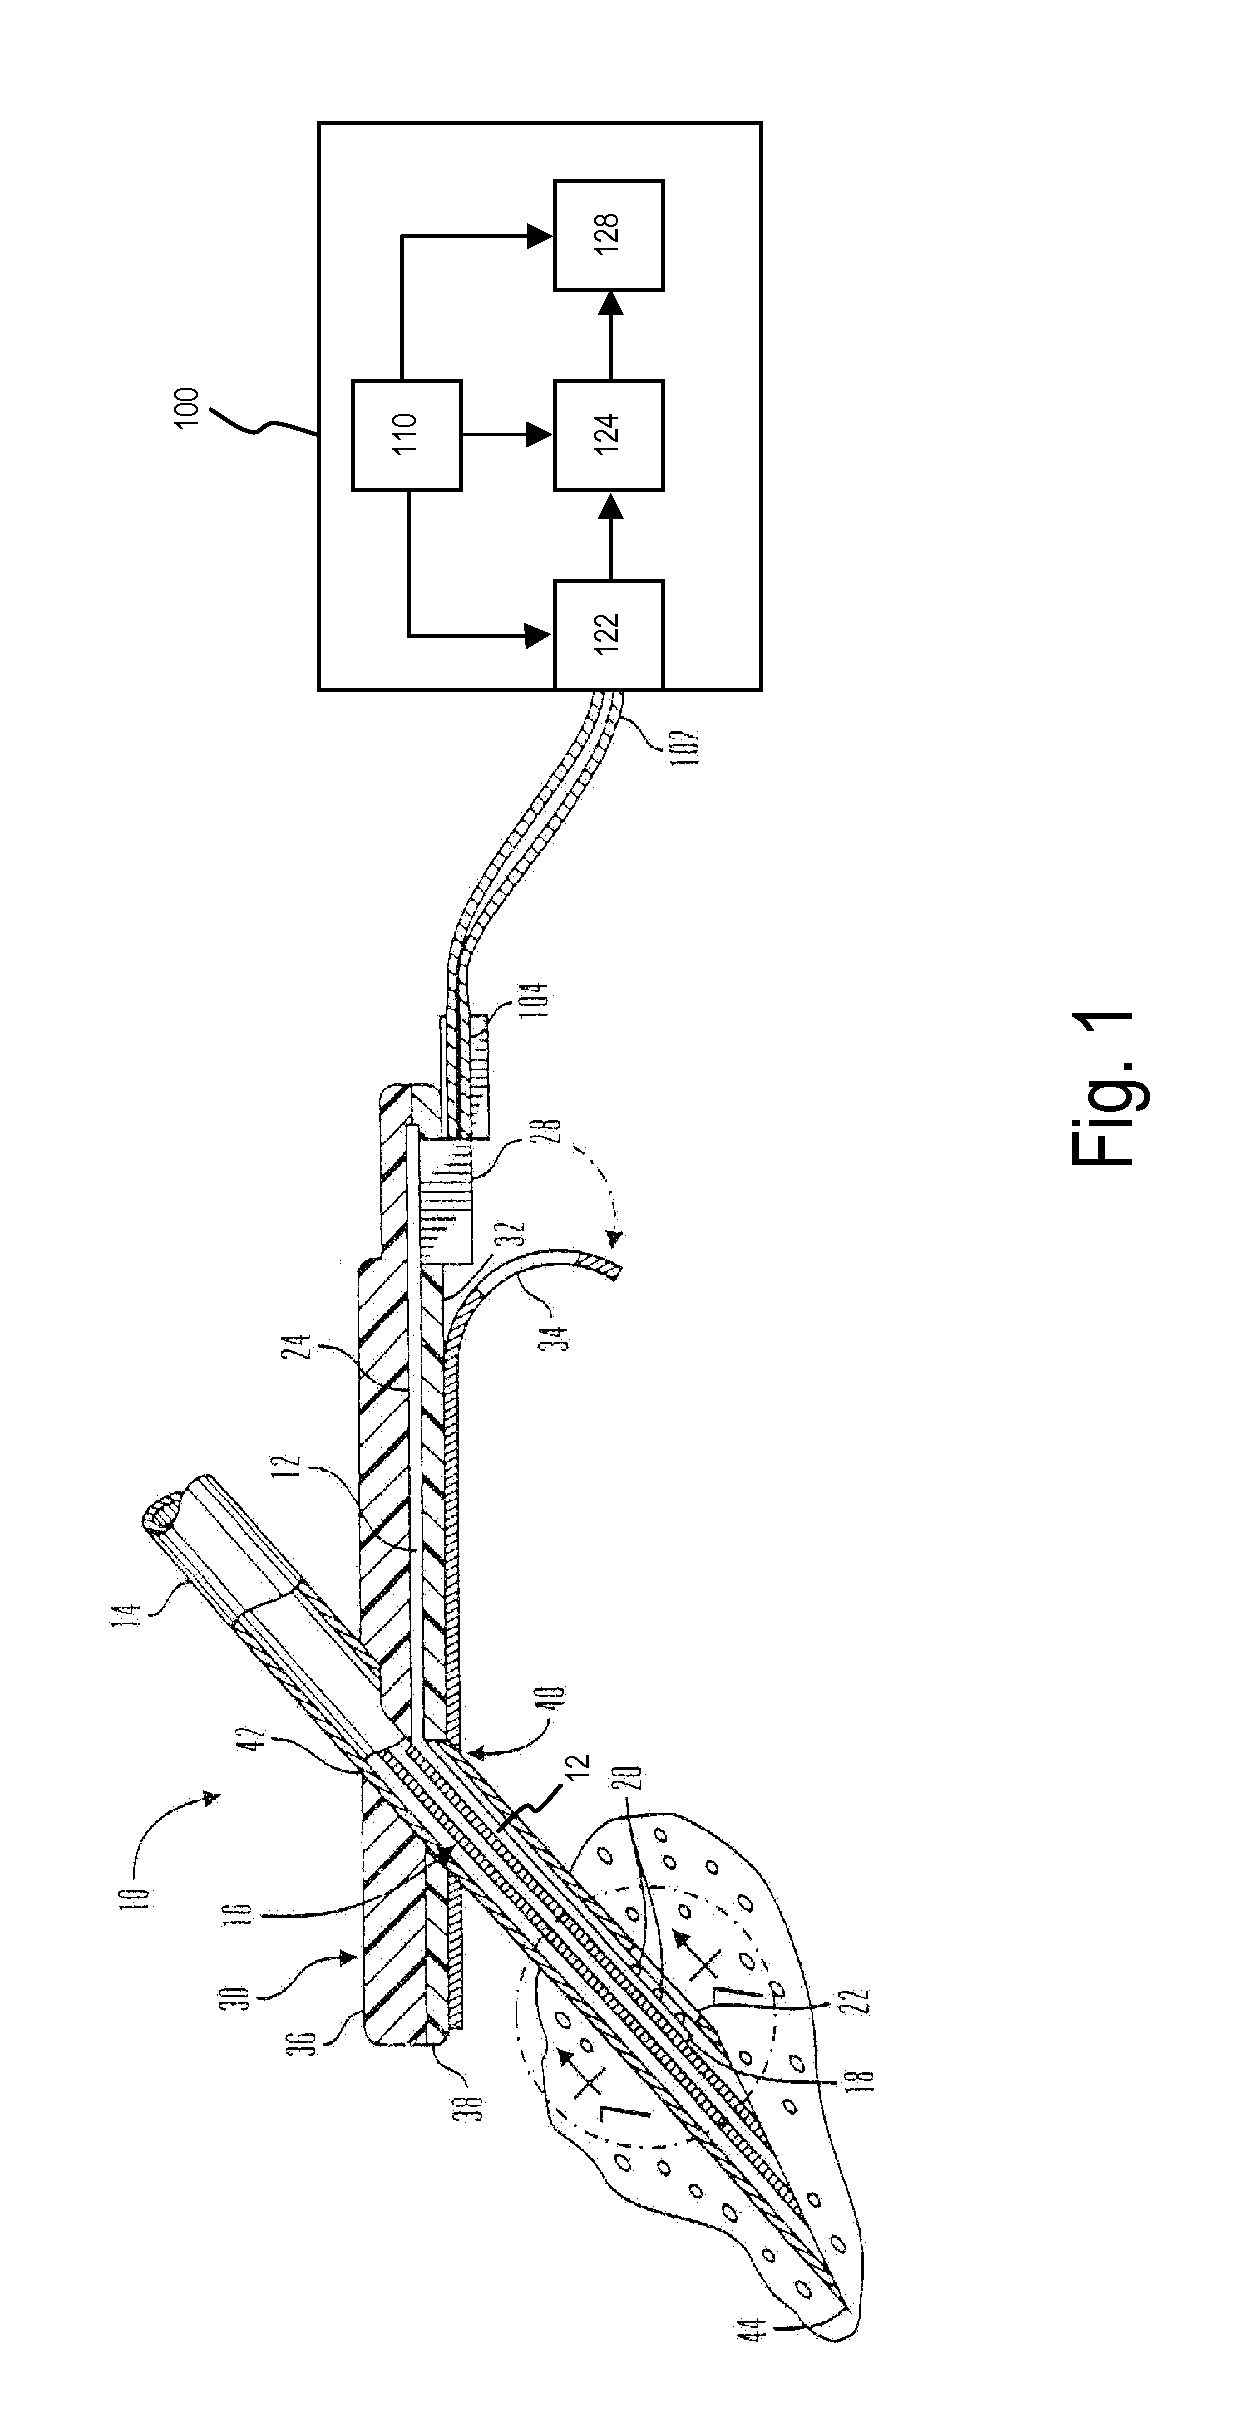 Method and System for Remedying Sensor Malfunctions Detected by Electrochemical Impedance Spectroscopy